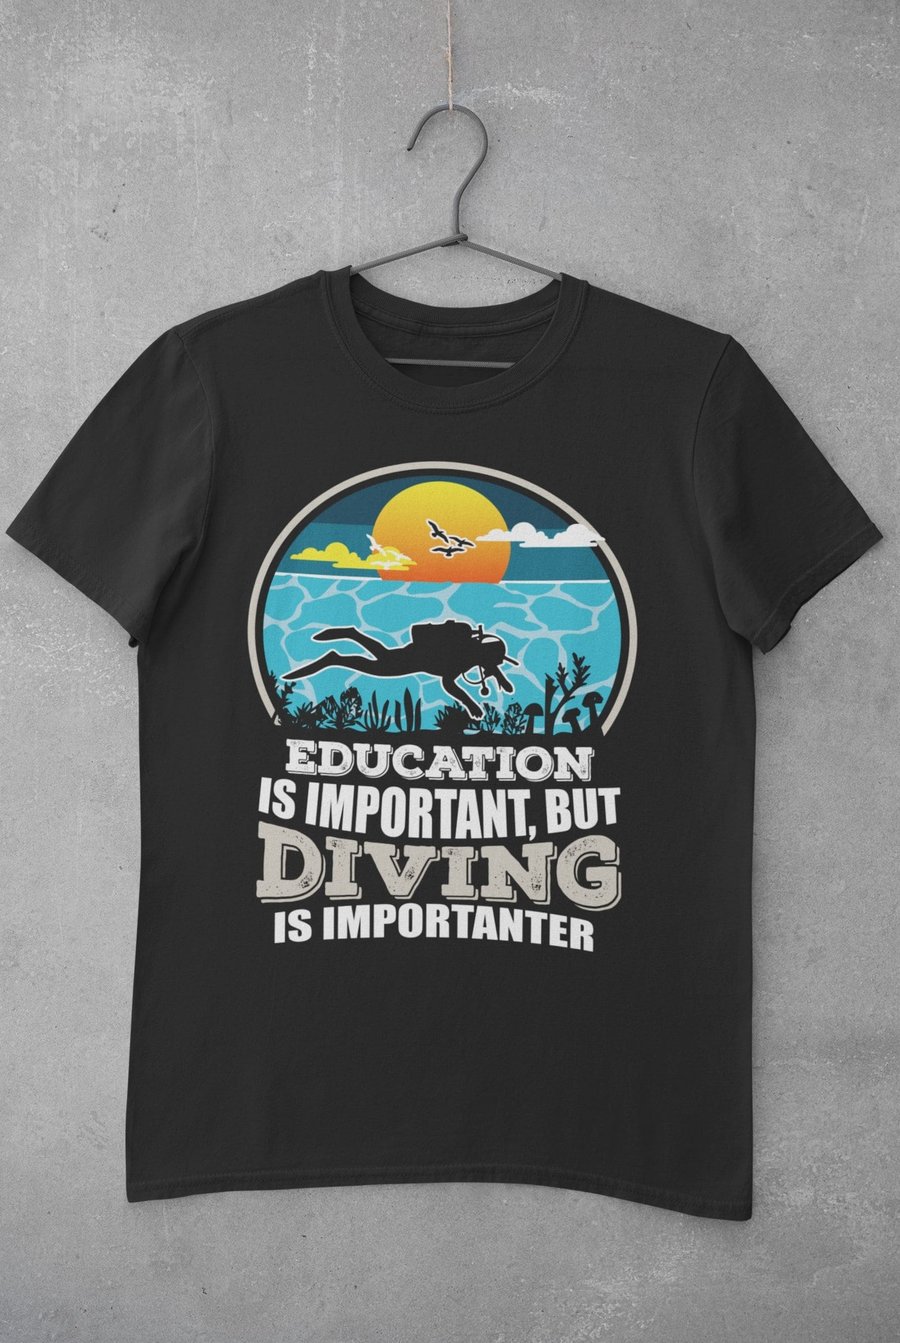 Funny Scuba Diving T Shirt Education Is Important But Diving Is Importanter joke